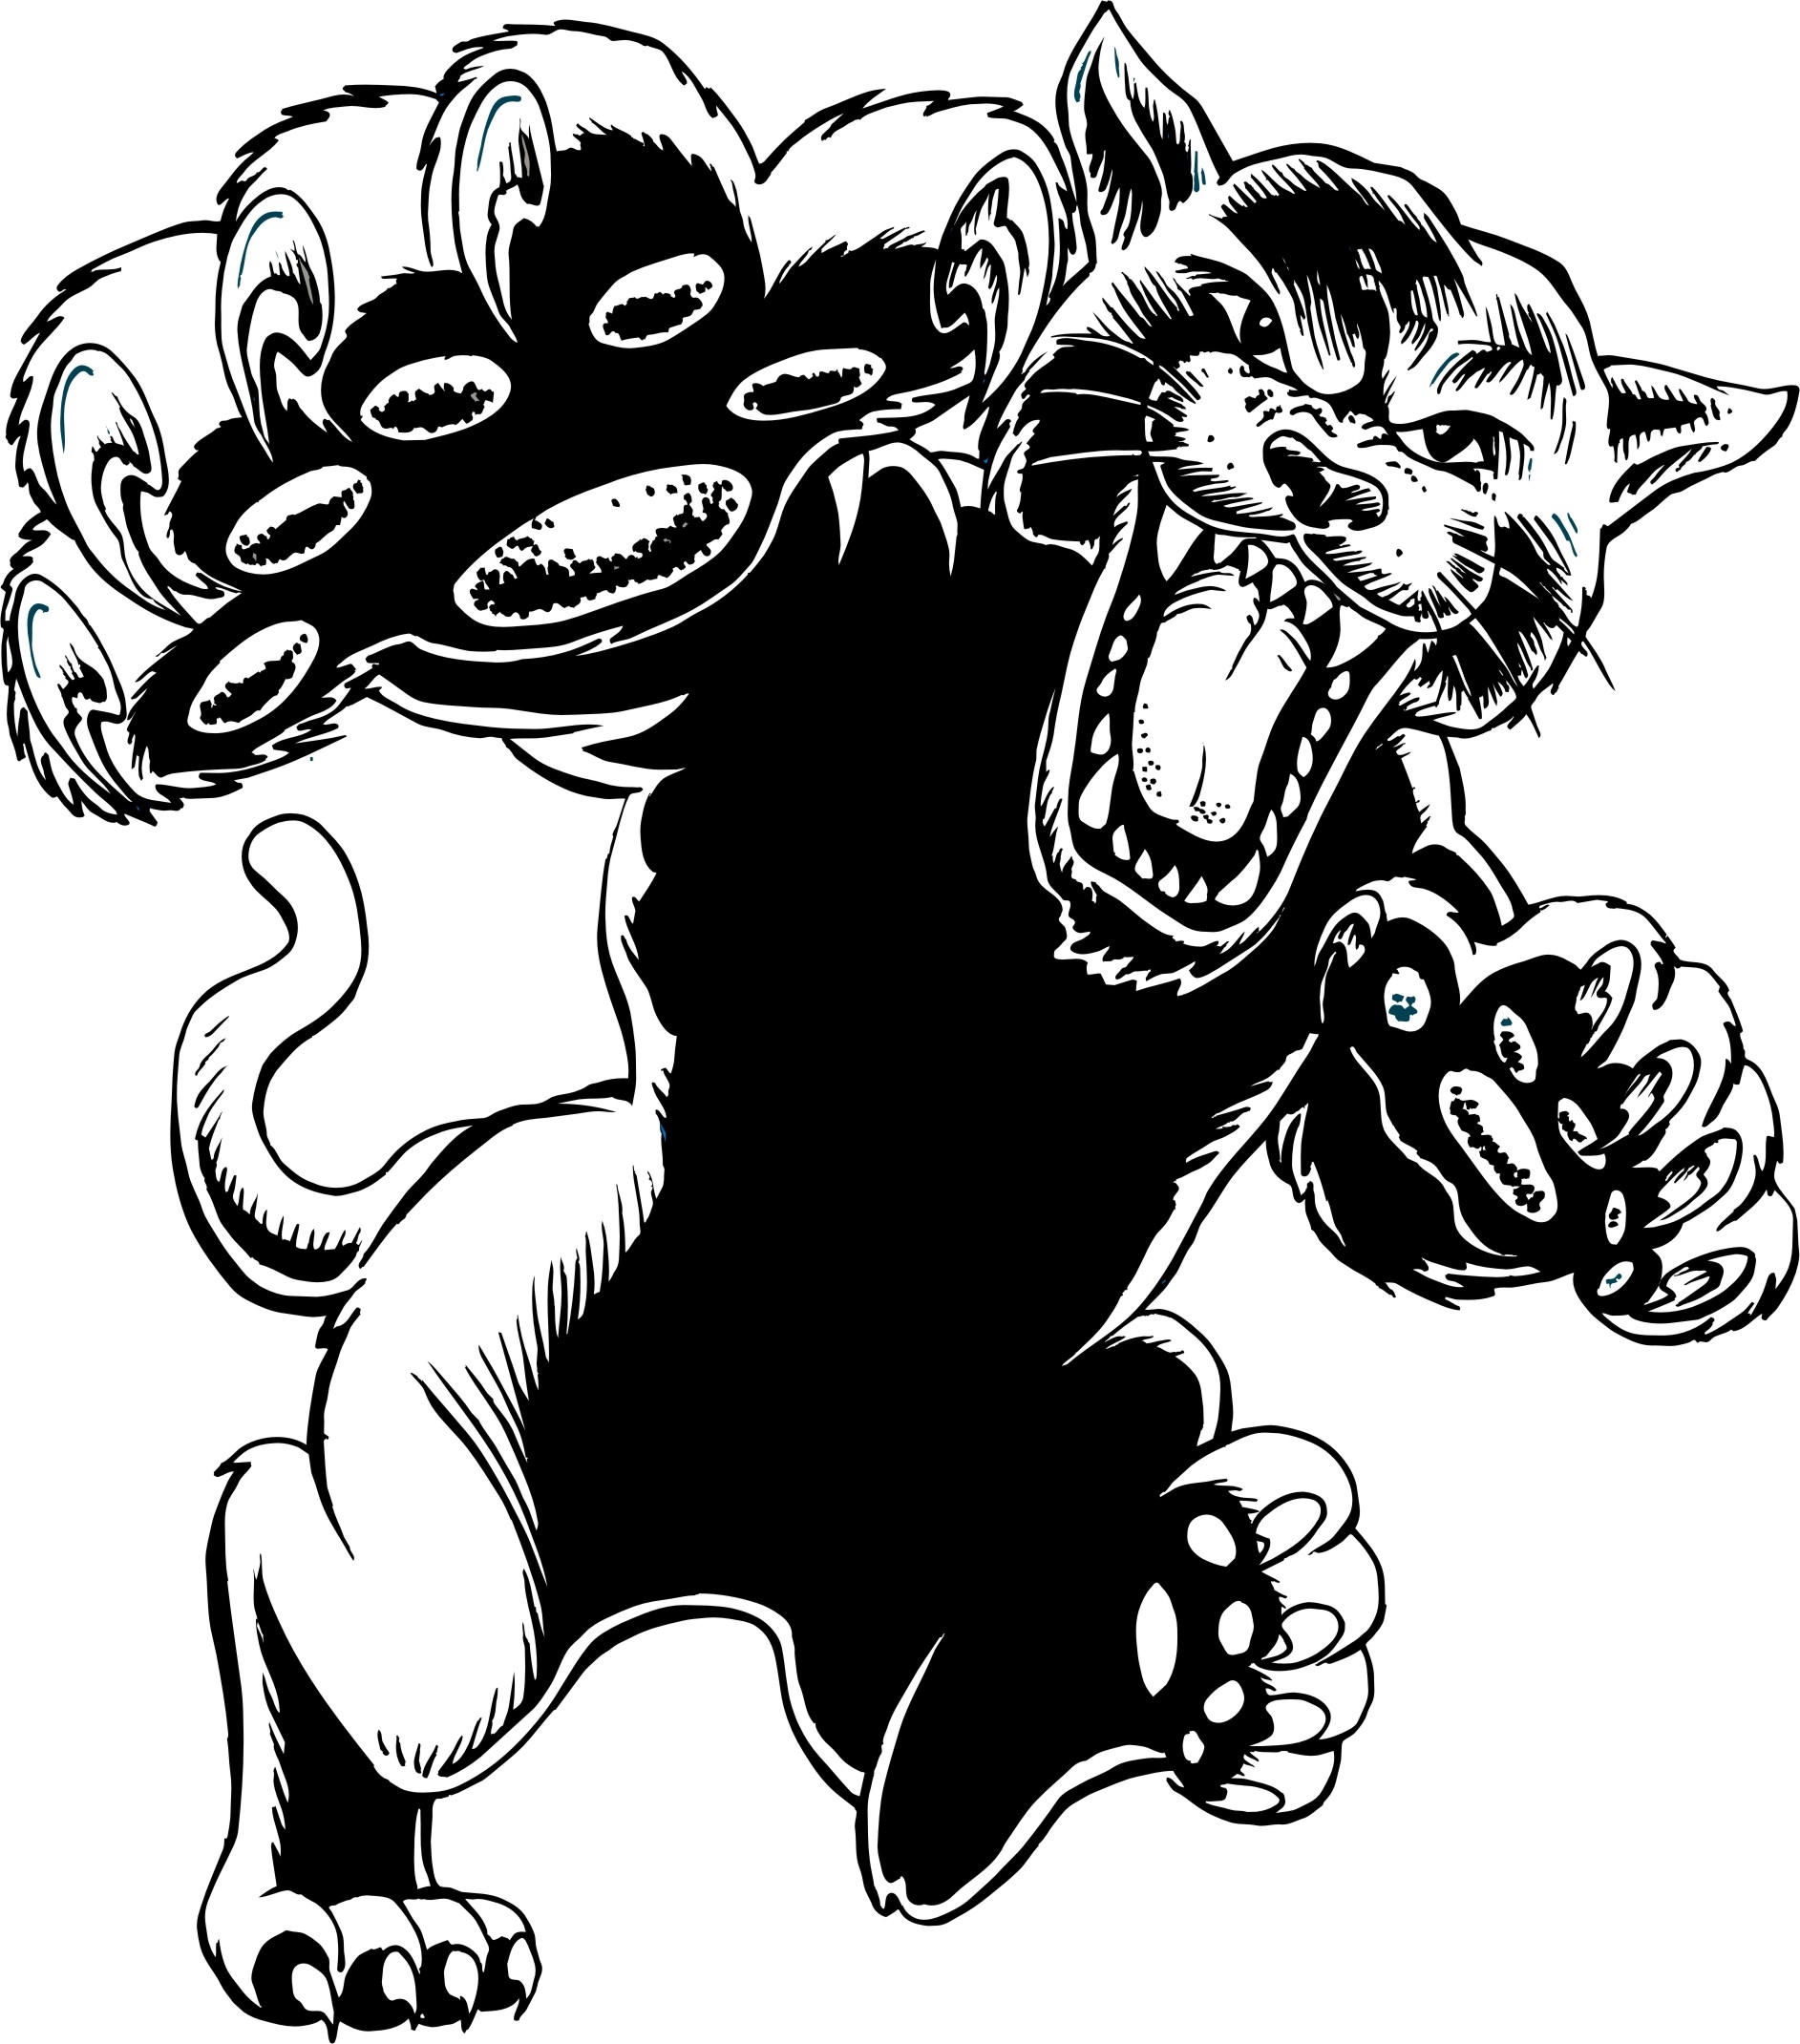 Panther Drawing - ClipArt Best.